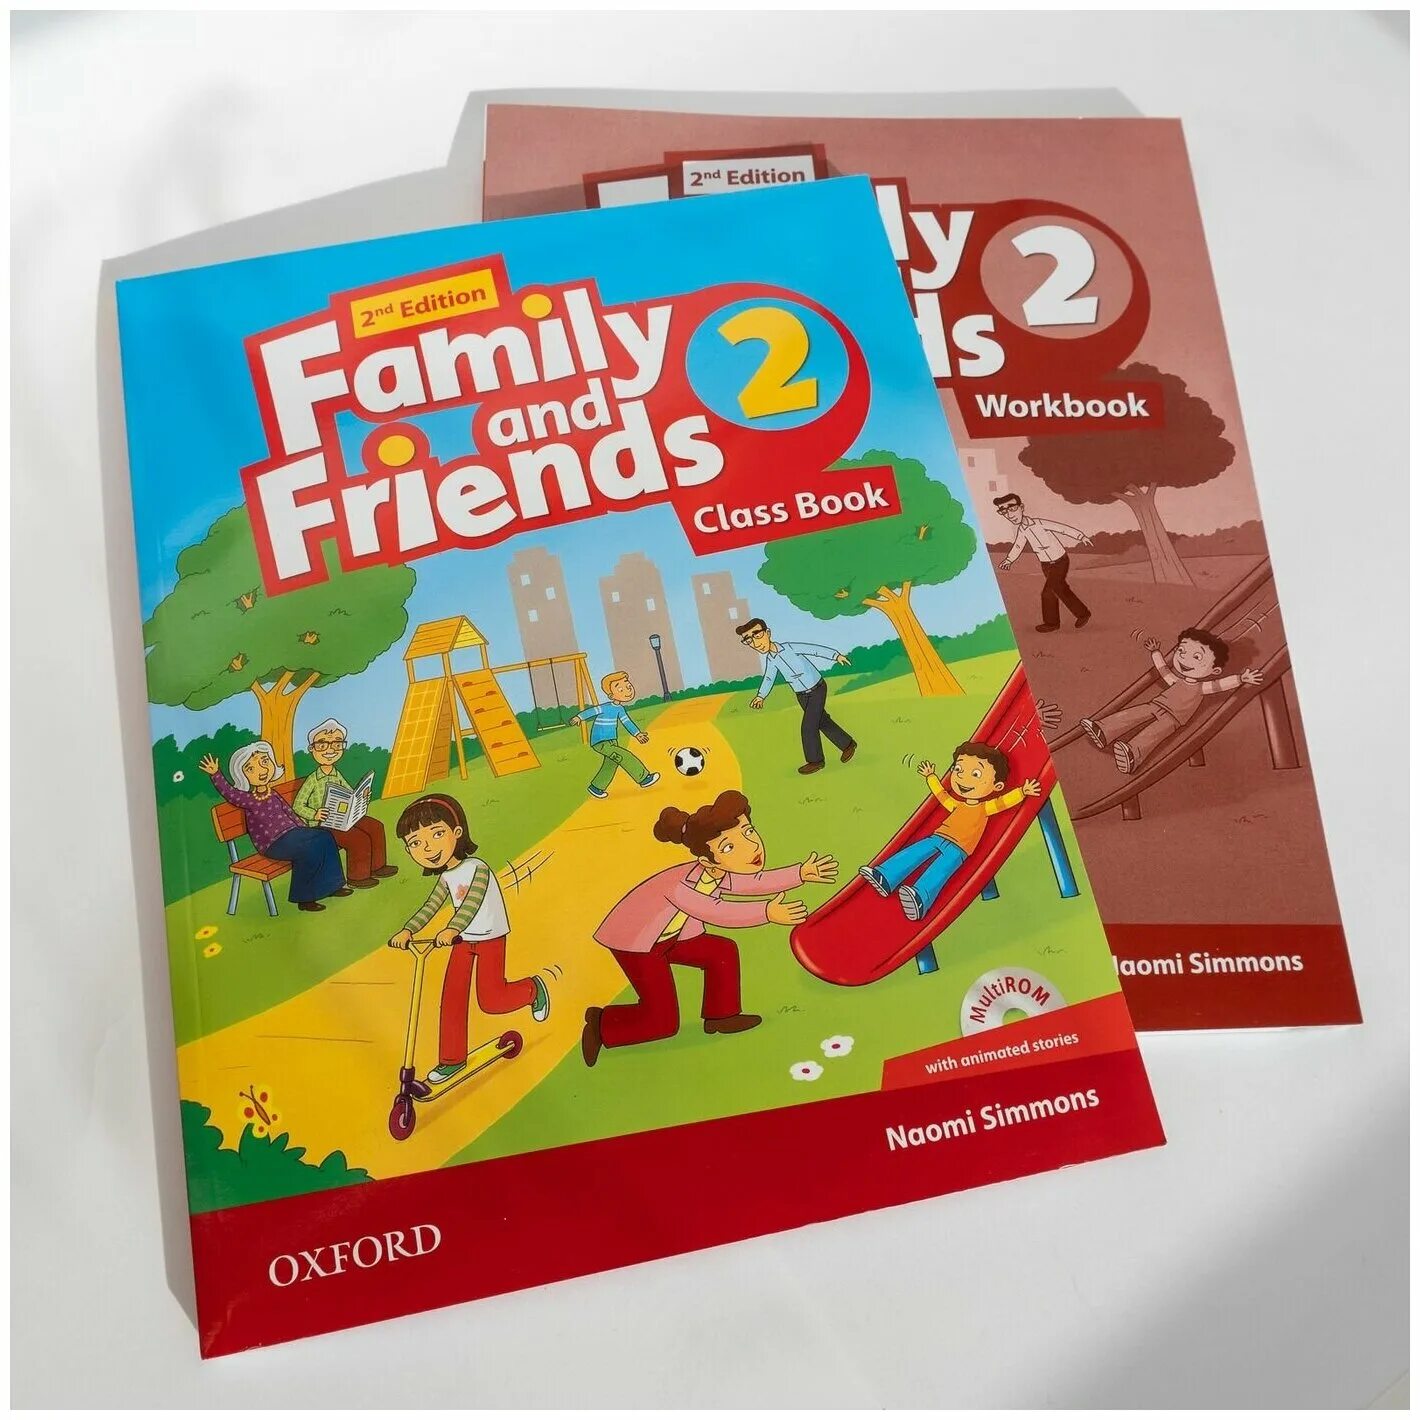 Family and friends 1 unit 11. Комплект Family and friends 1 (2nd Edition) class book + Workbook + CD. Английский Family and friends 2 class book. Family and friends 2 2nd Edition Classbook. Фэмили энд френдс 2 воркбук.